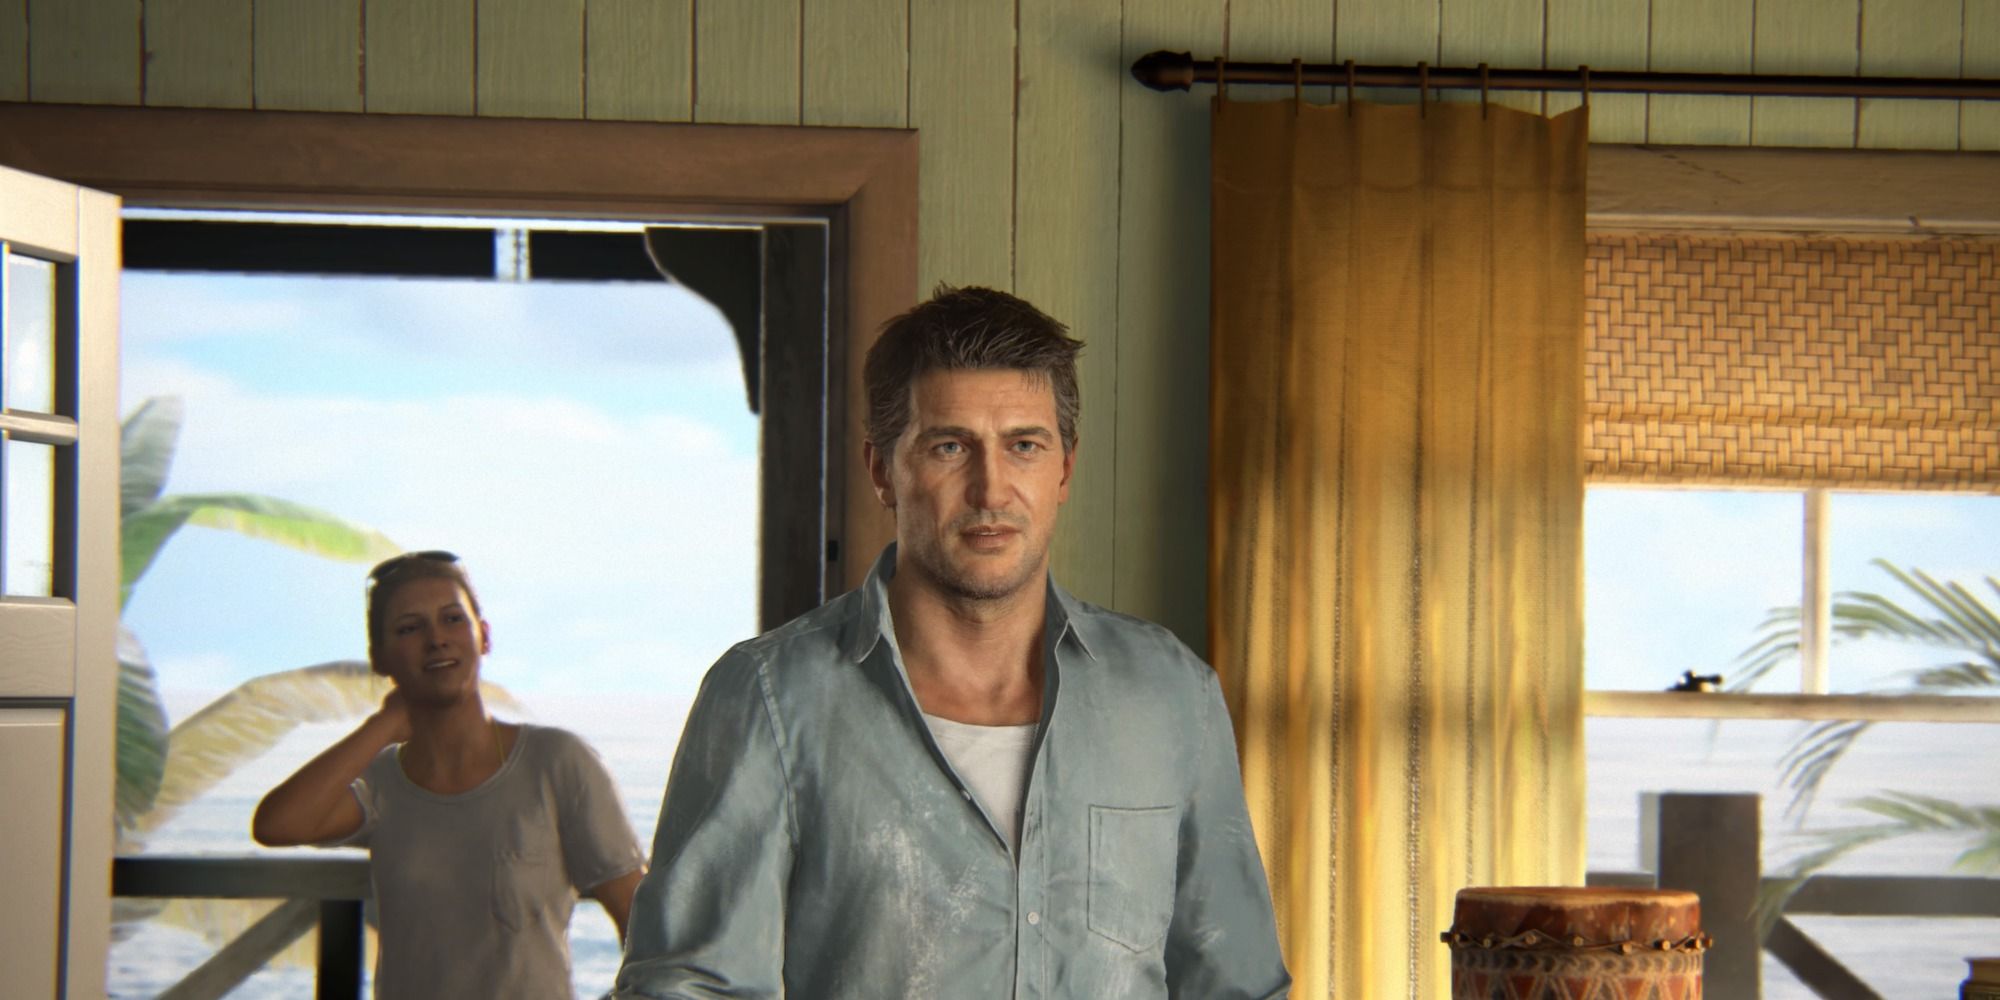 Screenshot from Uncharted 4's ending showing an older Drake and Elena entering their house